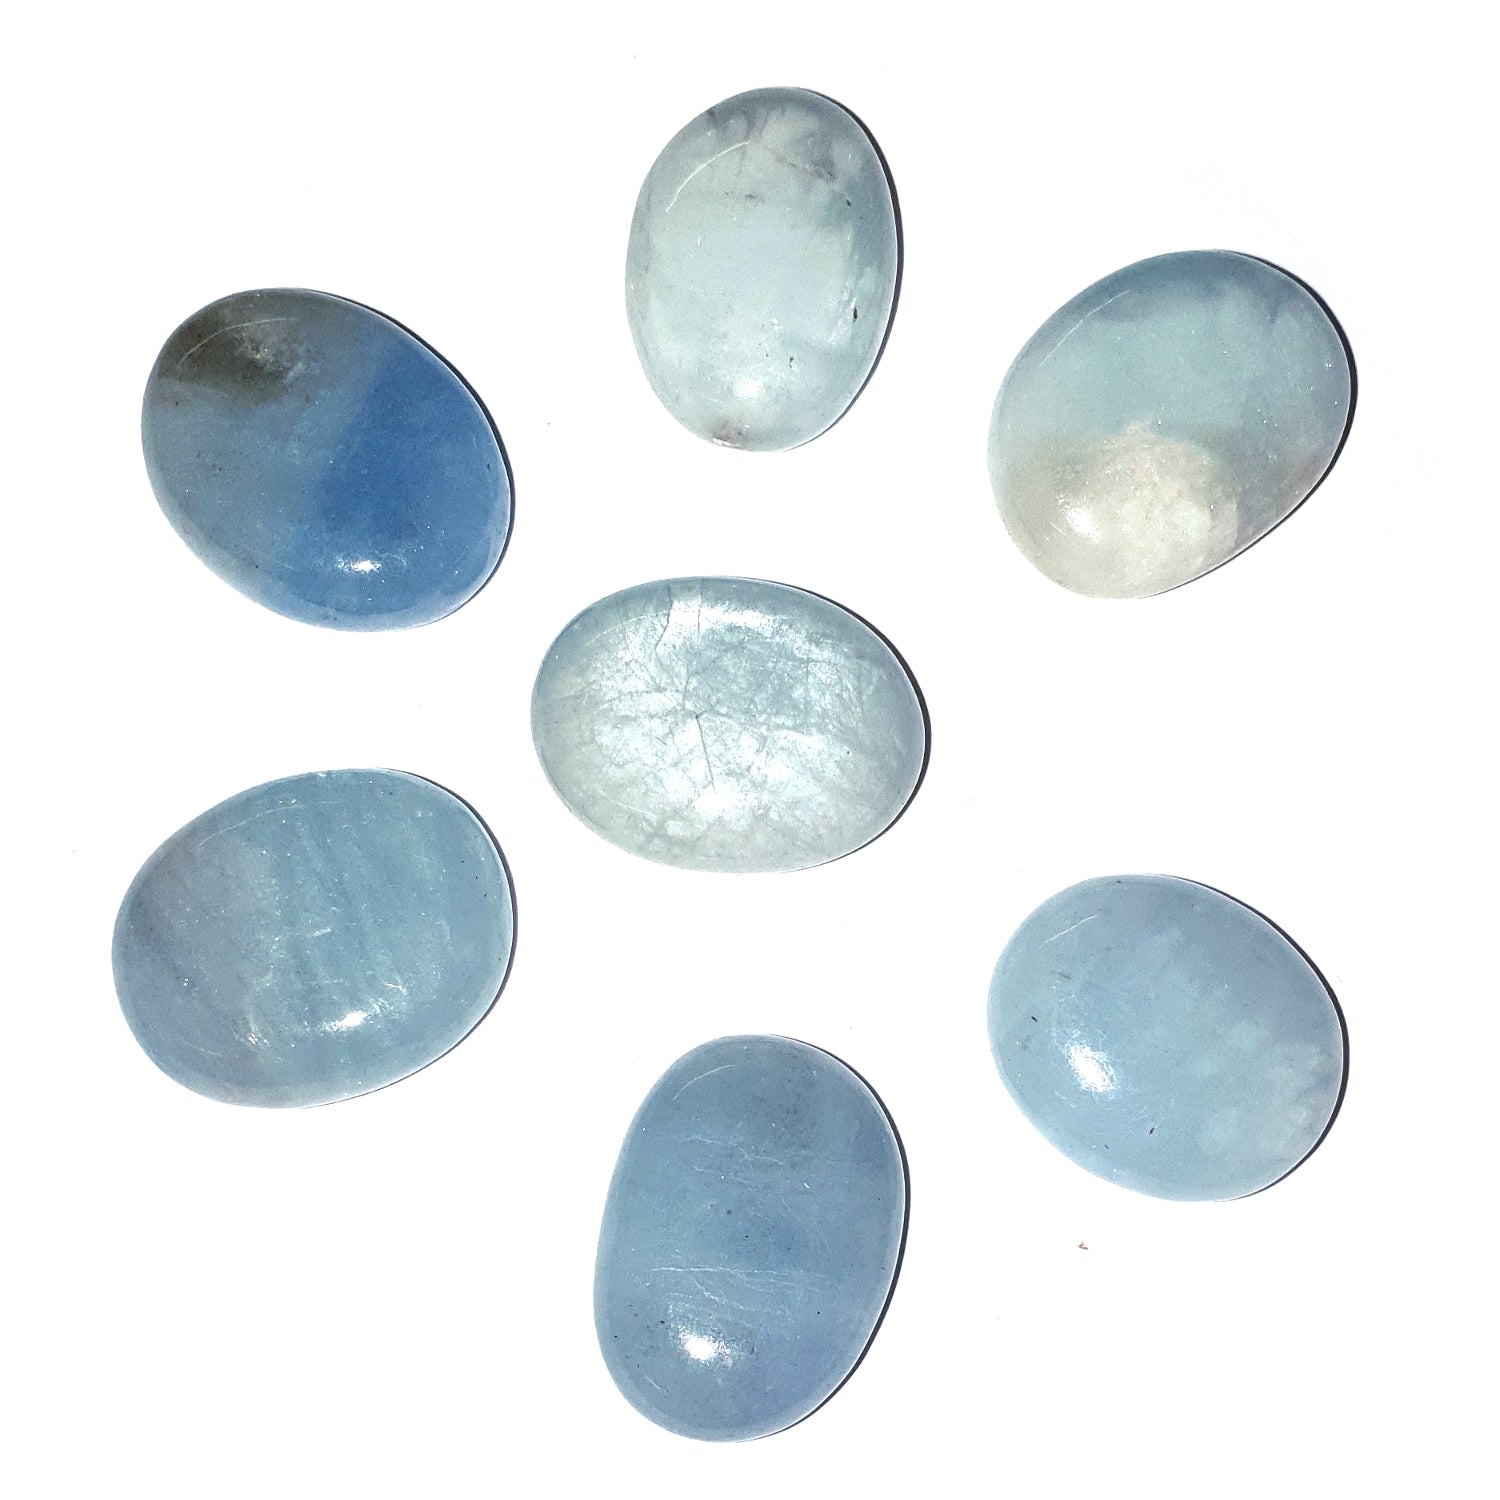 Aquamarine Mini Ovals are approx 20mm long.  Each Oval has been hand polished.  Aquamarine is part of the Beryl family, being a Stone of Courage enhances our ability for rapid knowledge, making us fearless when facing adversity. Aquamarine reminds me of the scout motto "Always be prepared", Aquamarine has flowing energy but the energy is also structured o that balance and order may be maintained.